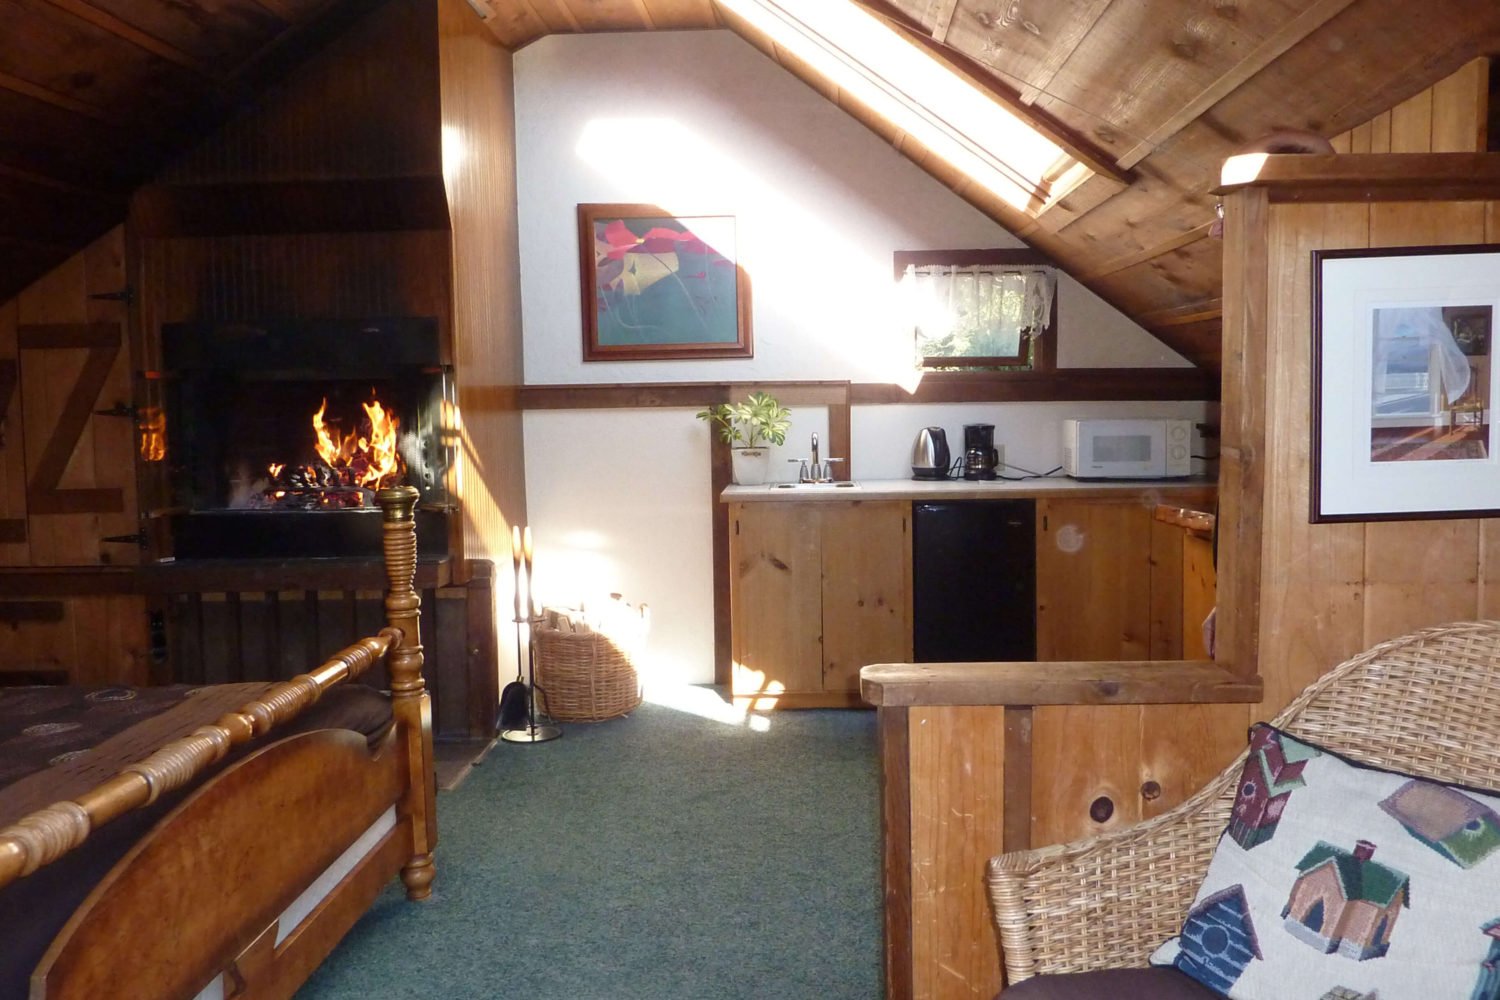 Tree House fireplace next to kitchen and bed with wicker chair in foreground